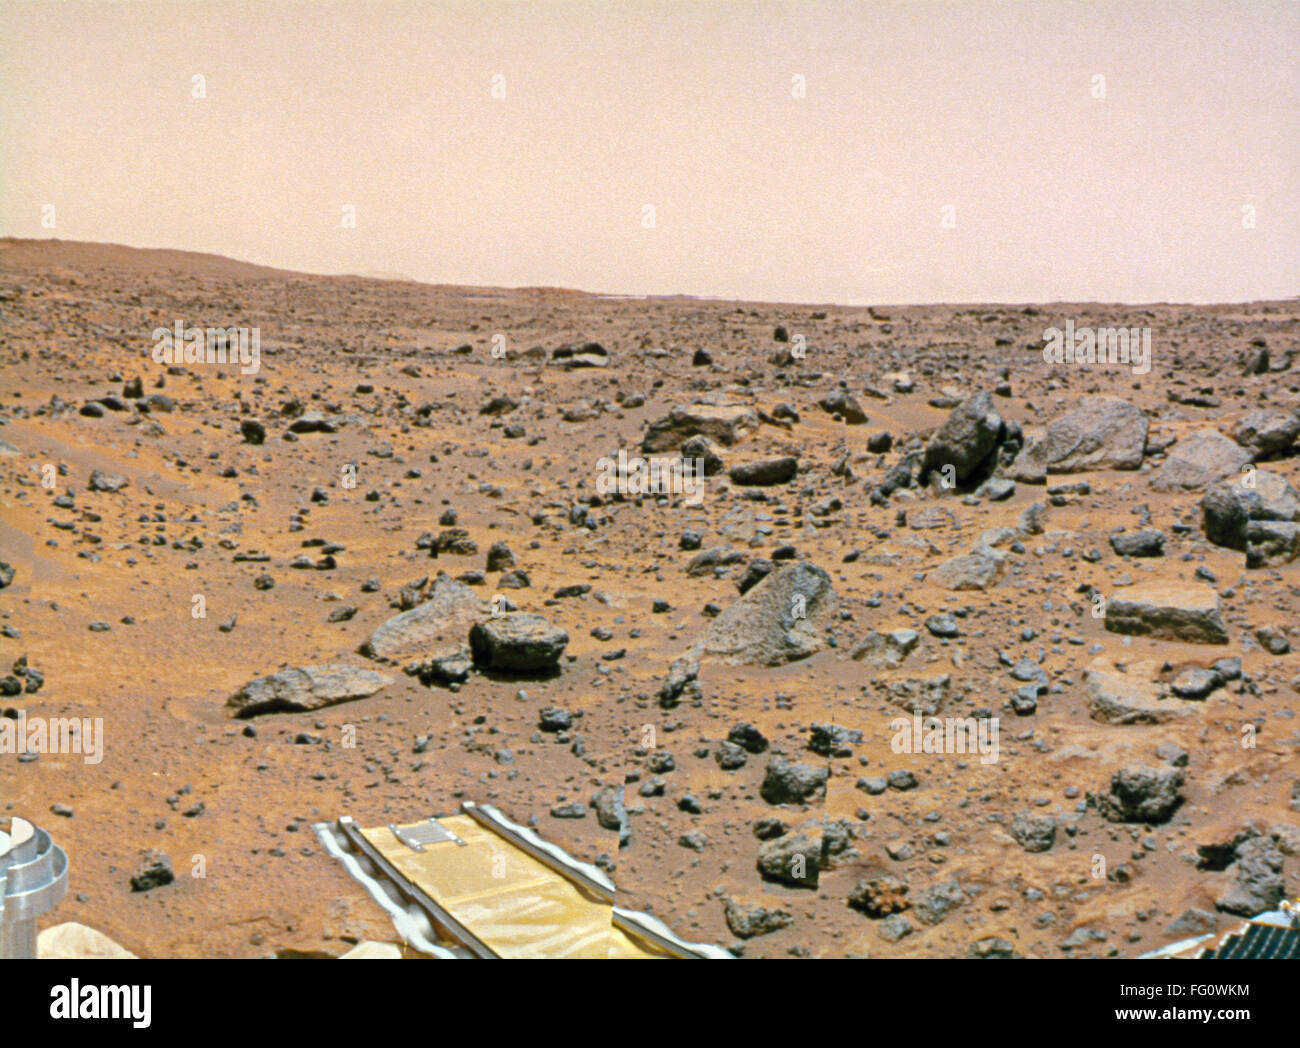 SPACE: PATHFINDER, 1997. /nThe Martian landscape and the Mars Pathfinder lander ramp. Photographed by the Imager for the Mars Pathfinder, 1997. Stock Photo